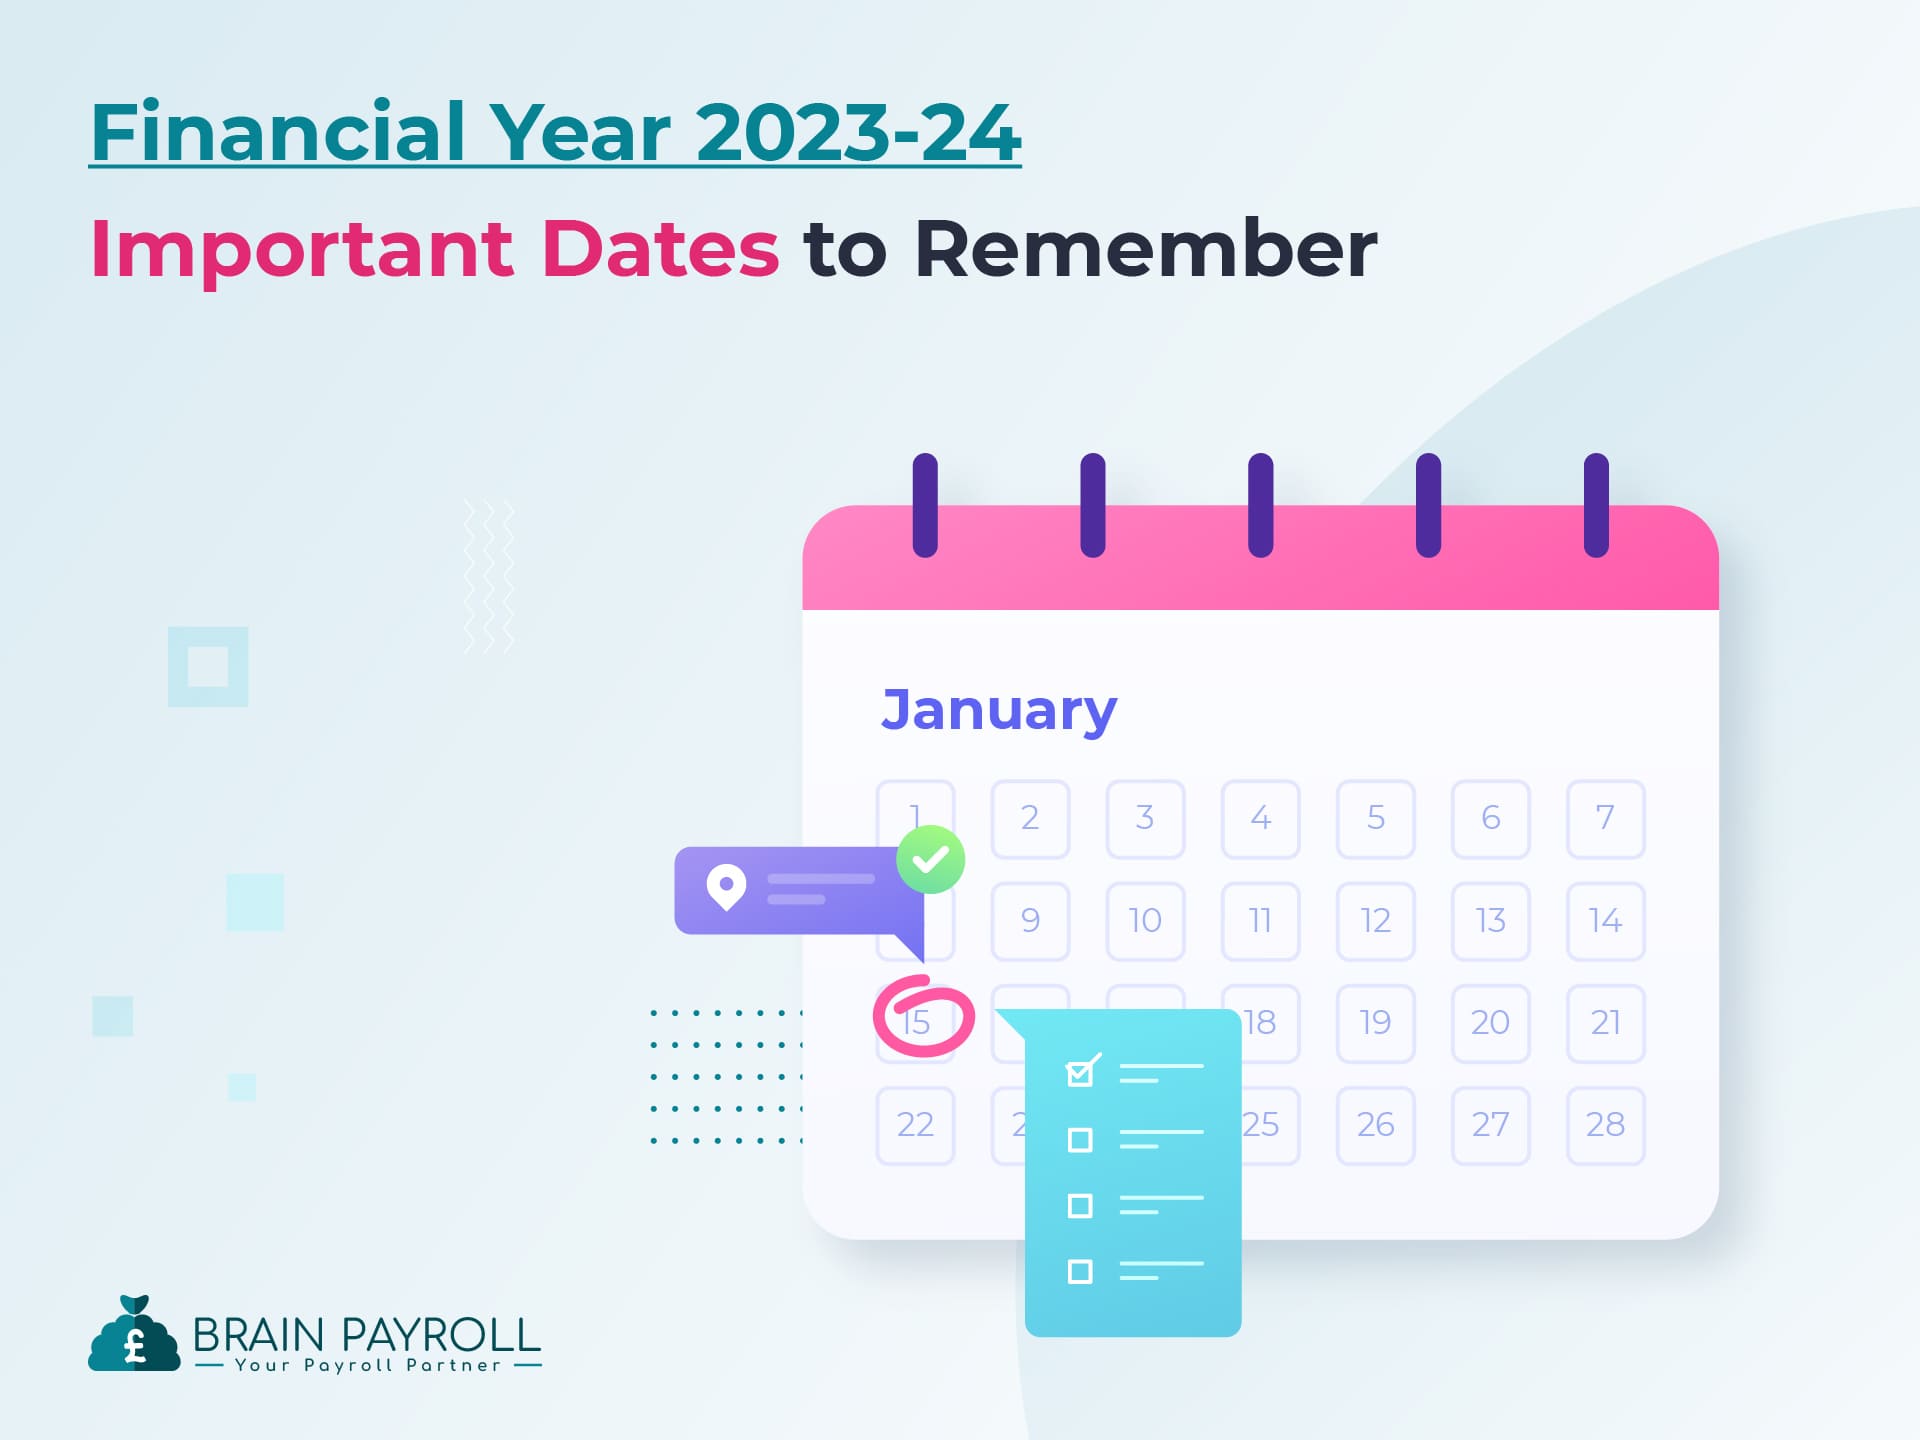 Financial Year 2023-24 Important Dates to Remember